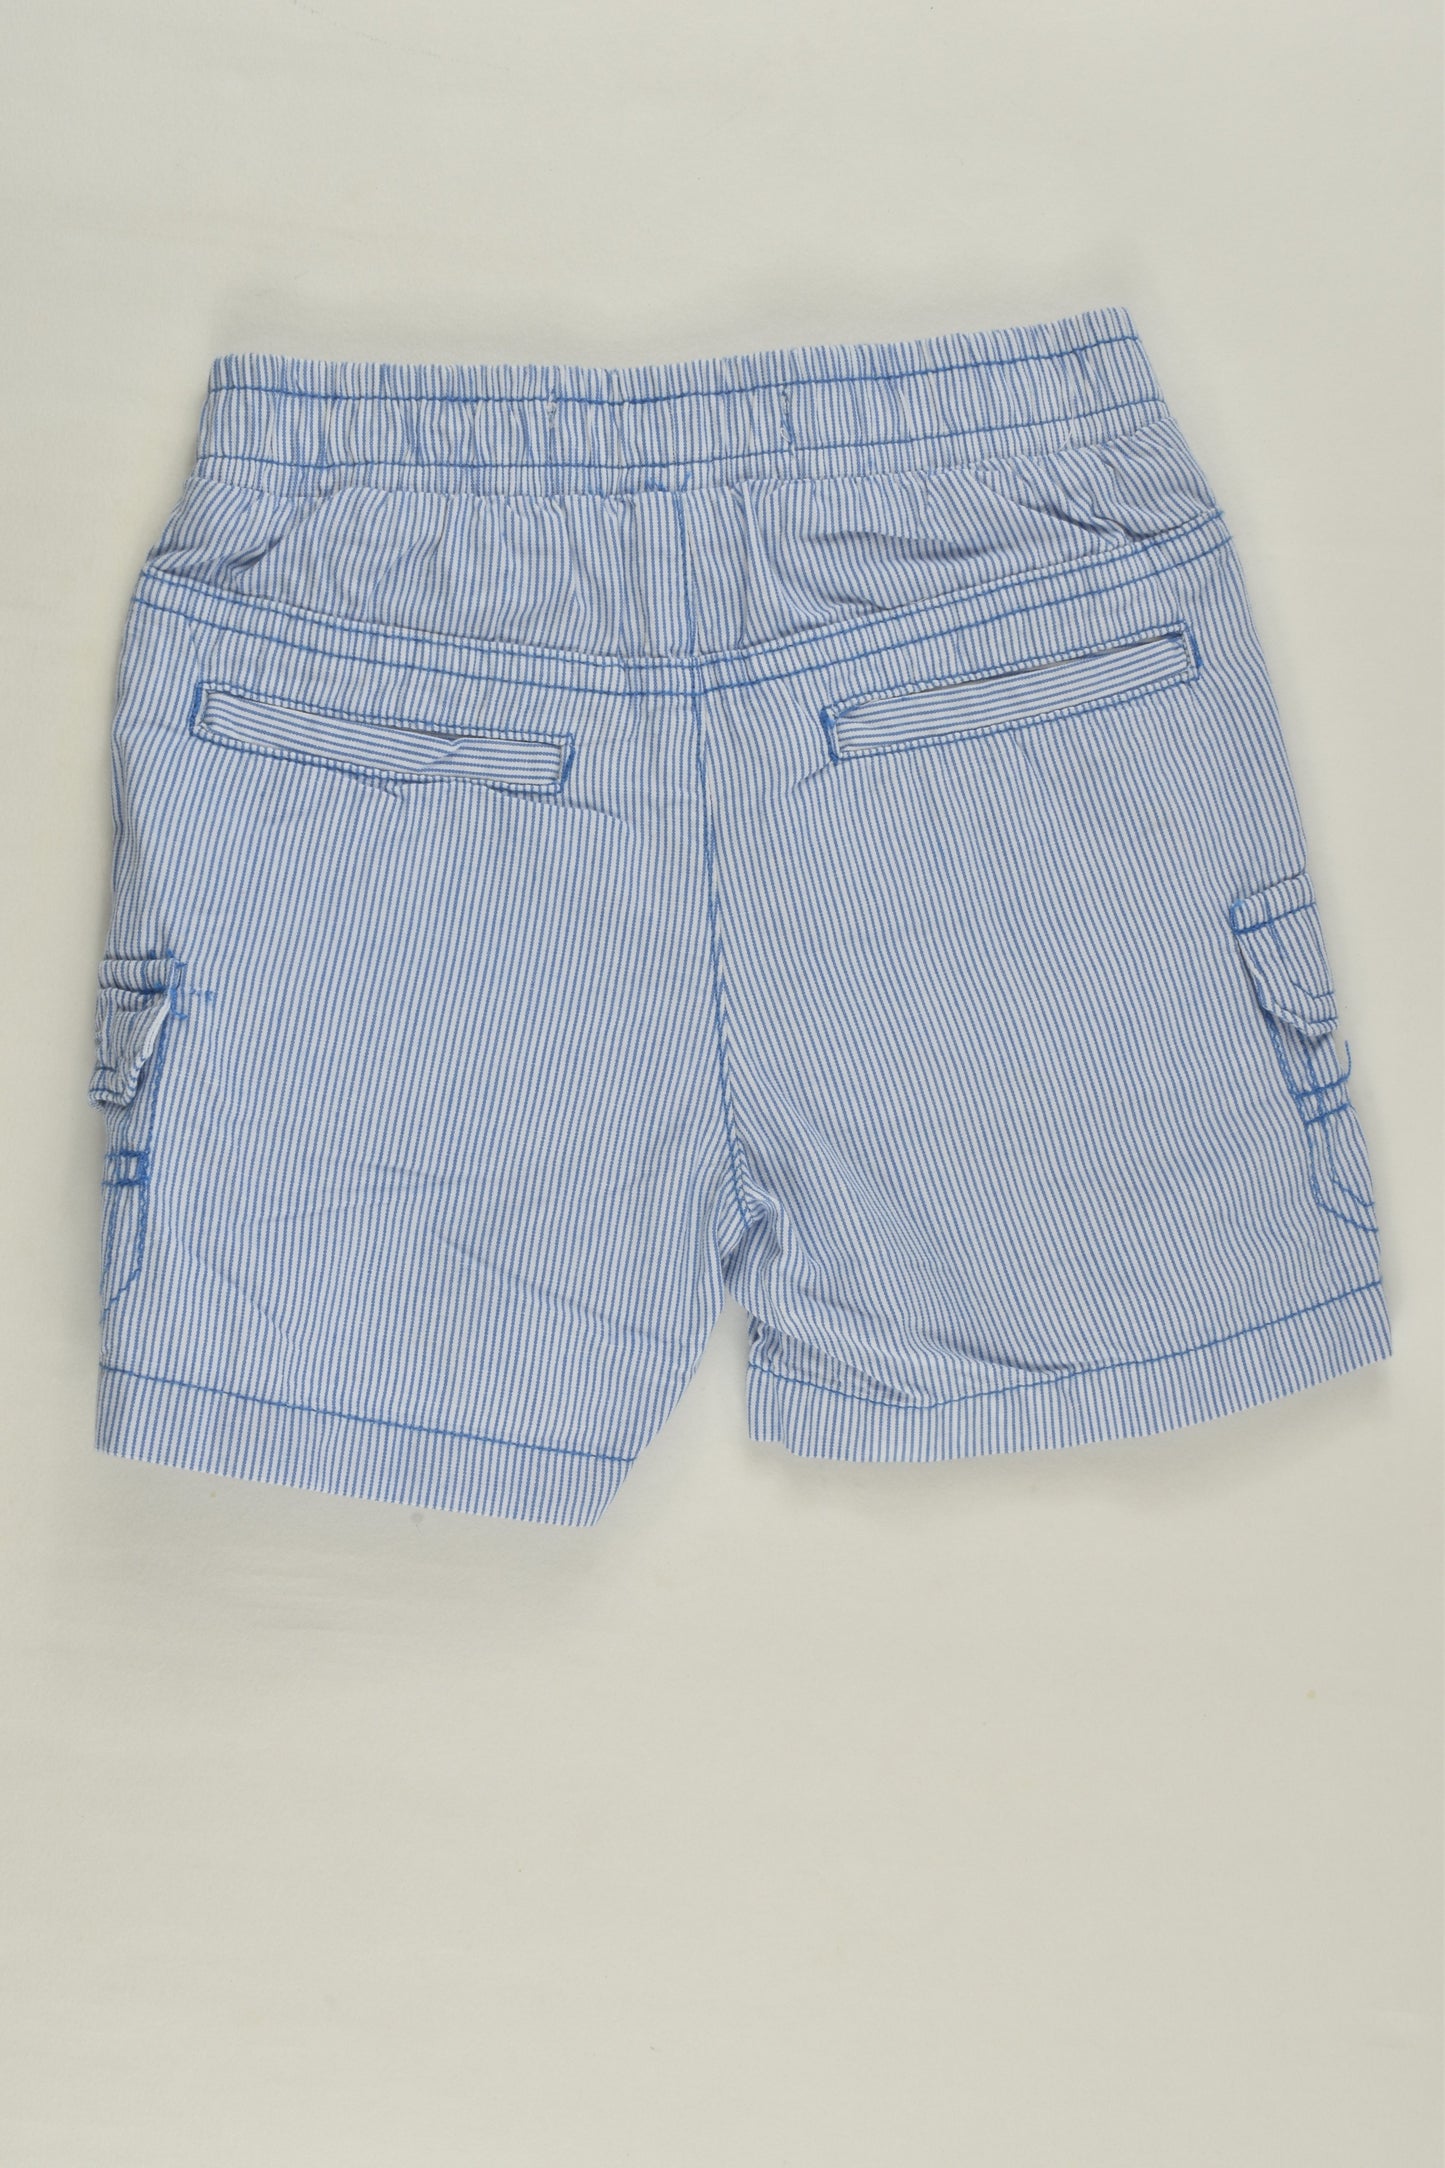 Babaluno Size 0 (6-9 months) Lightweight Striped Shorts